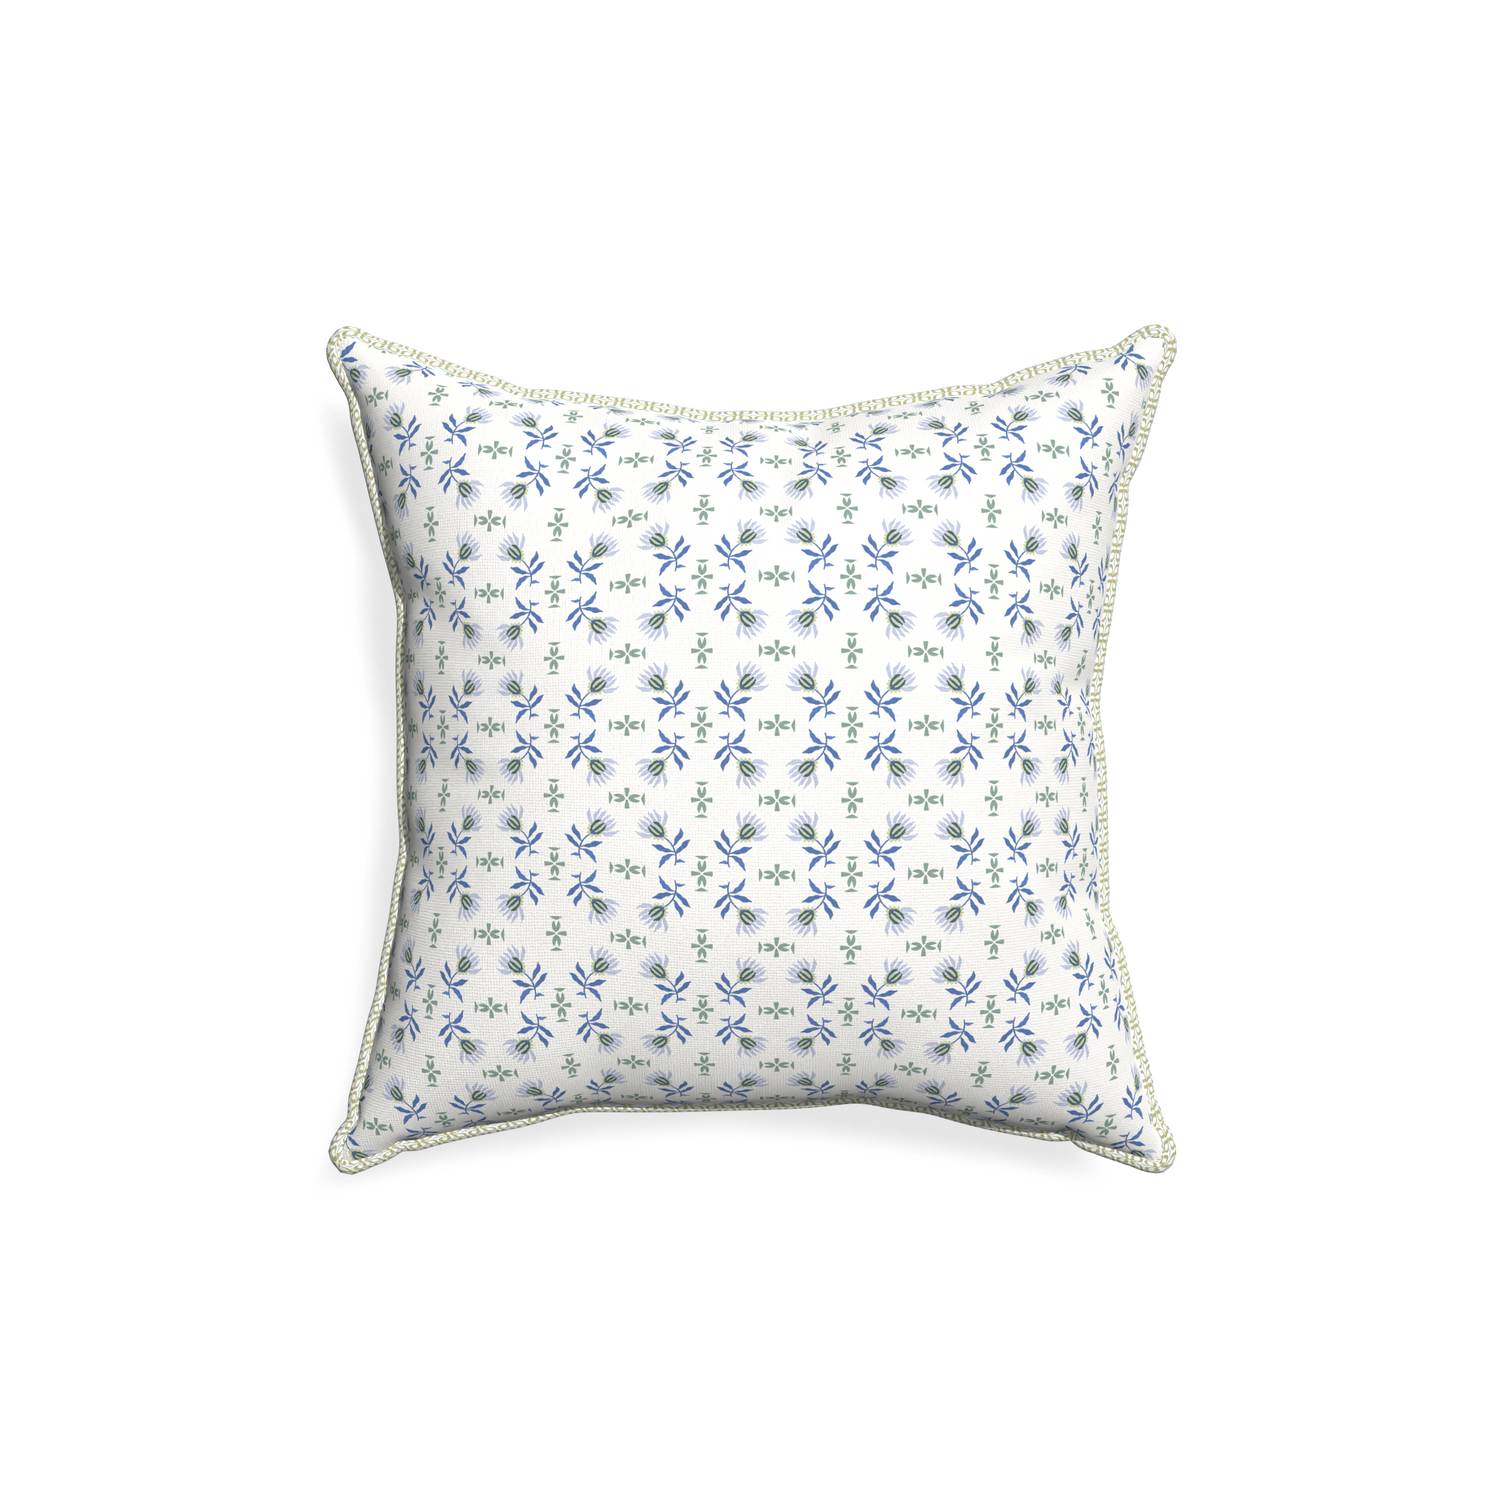 18-square lee custom pillow with l piping on white background